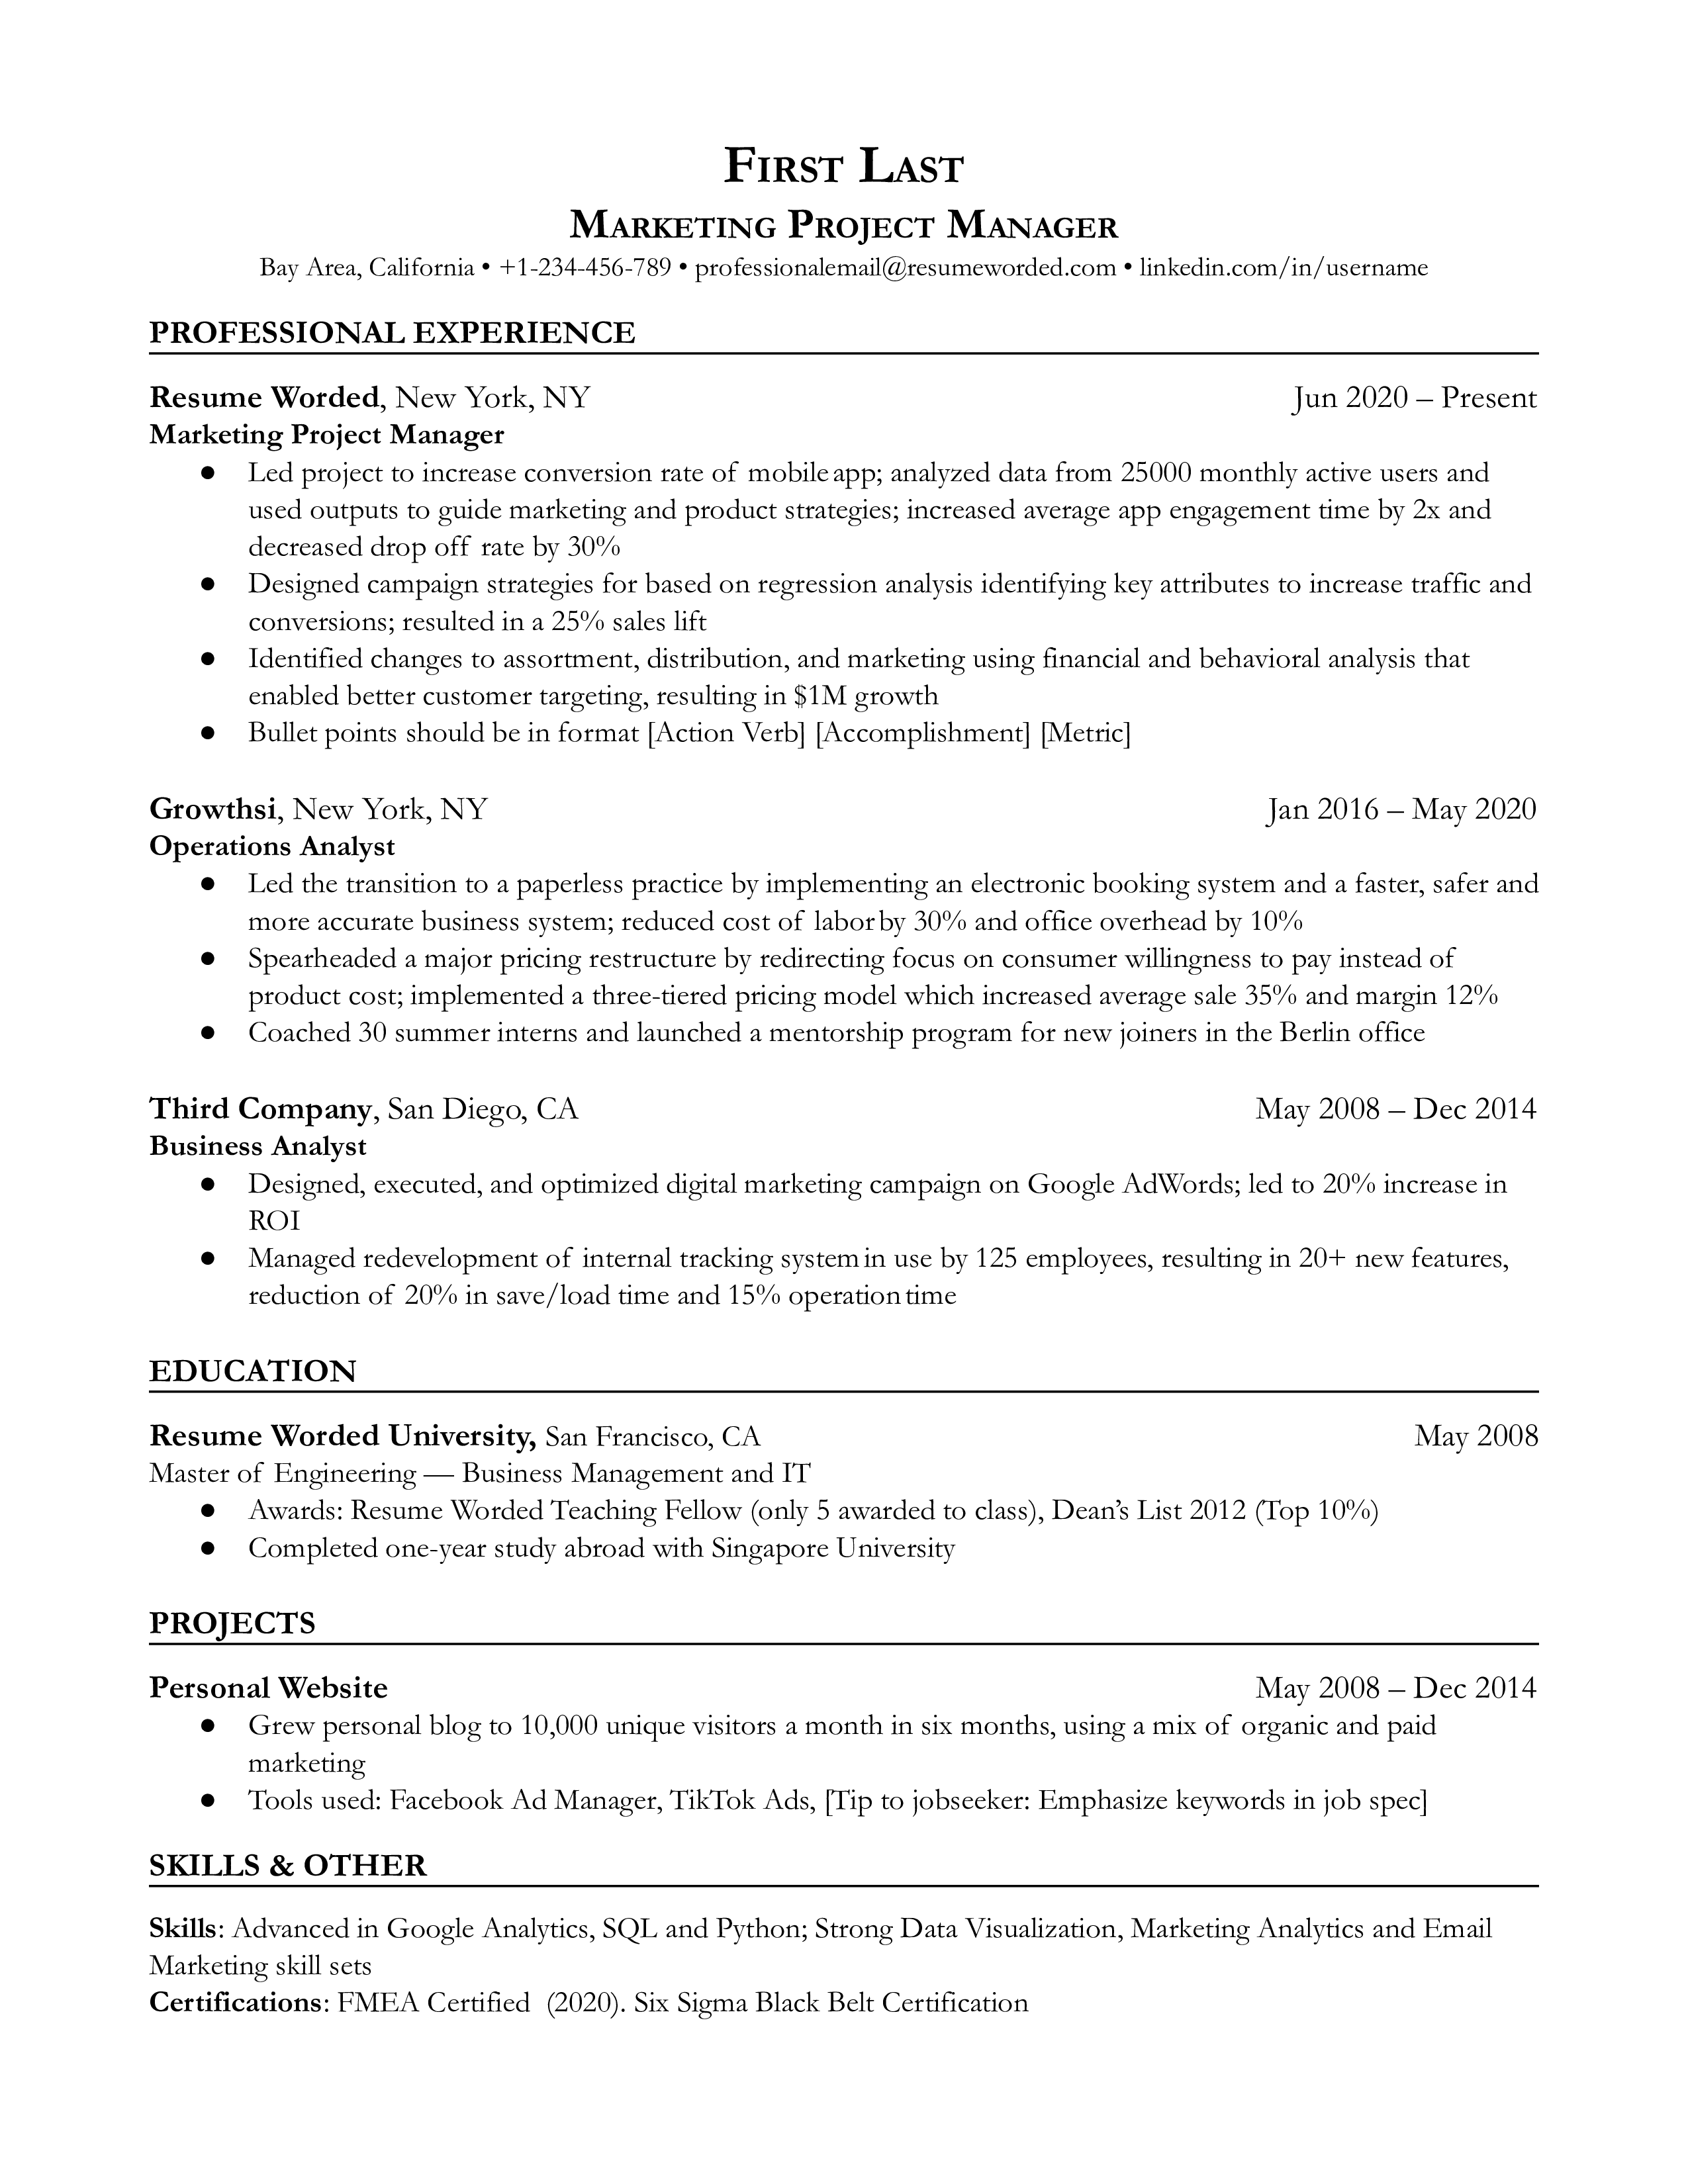 Marketing Project Manager Resume Sample